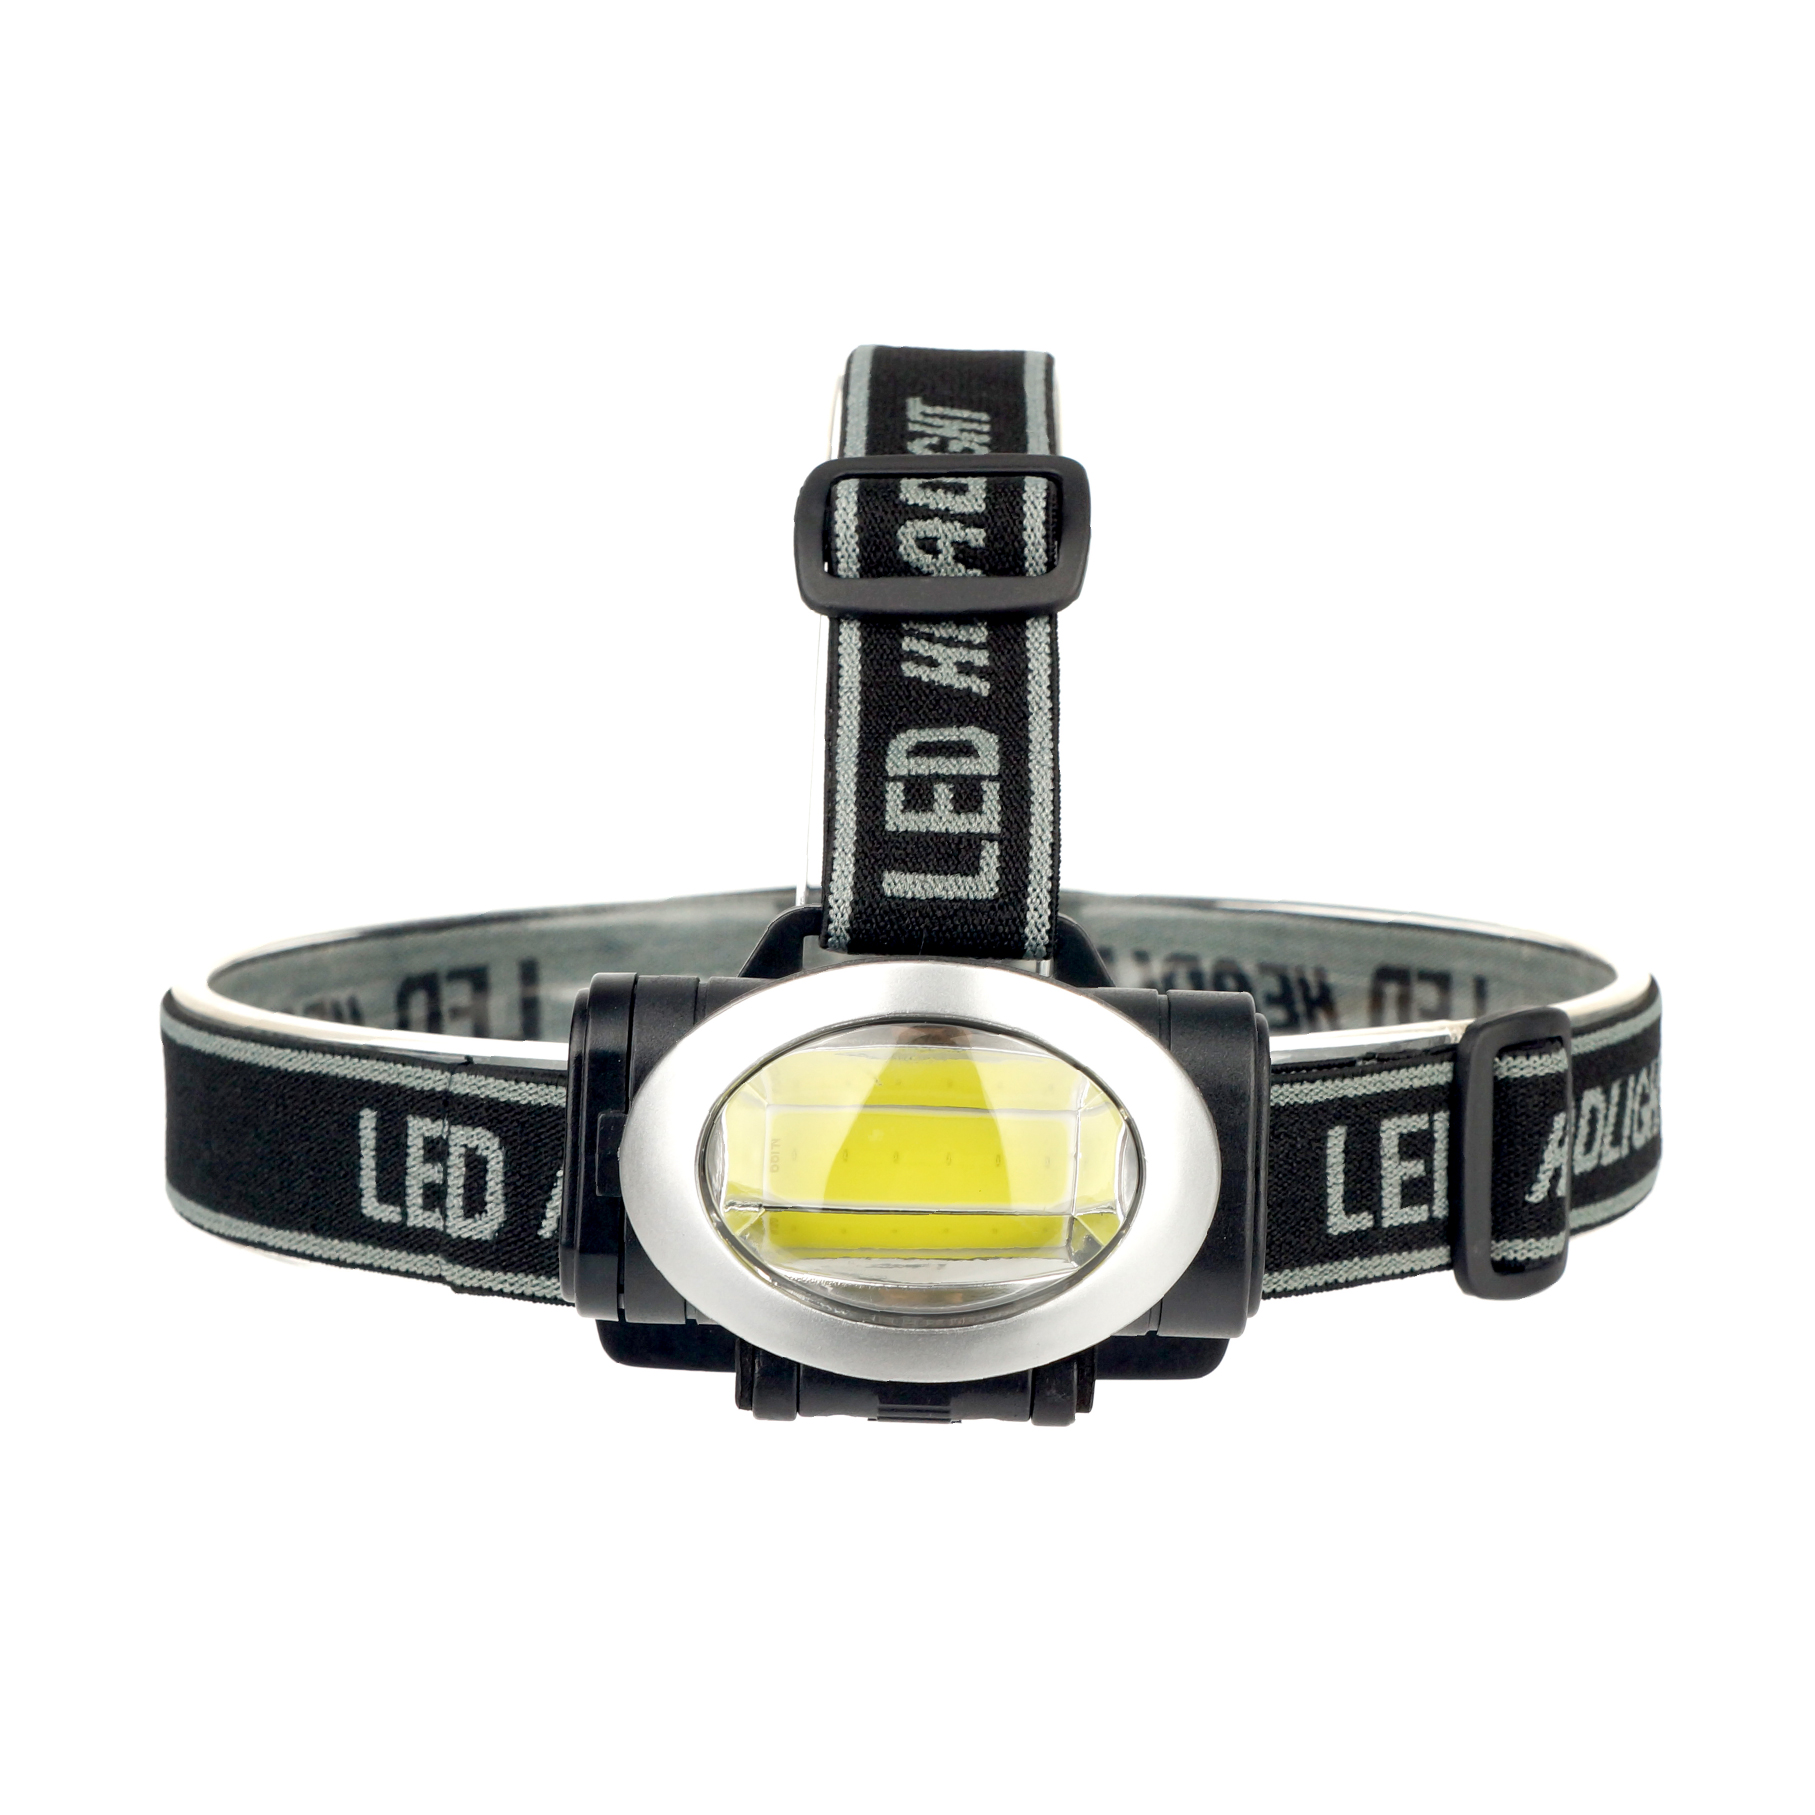 LED 80LM USB Rechargeable Headlamps